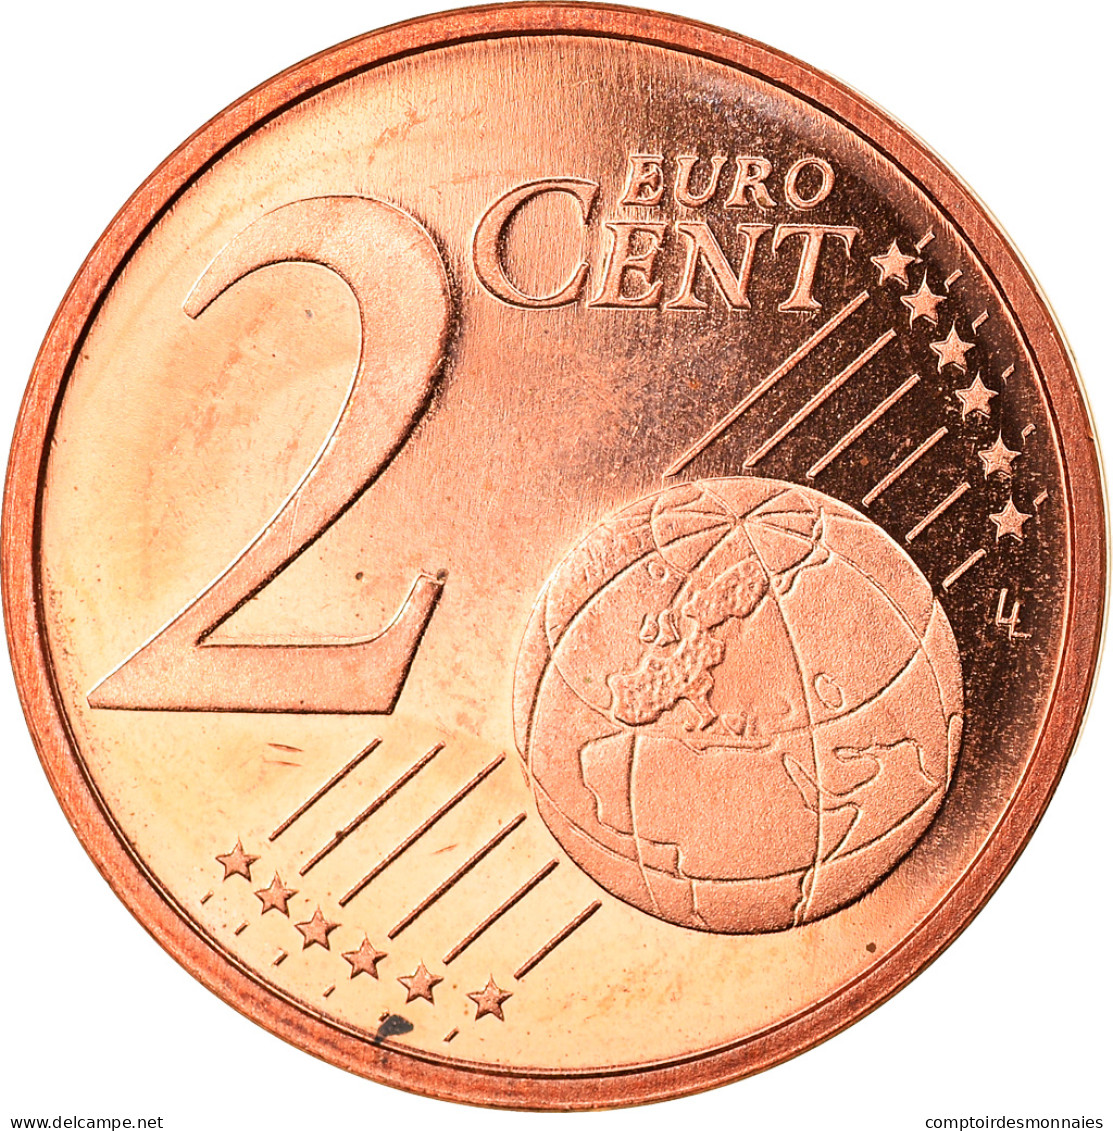 Pays-Bas, 2 Euro Cent, 2000, Utrecht, FDC, Copper Plated Steel, KM:235 - Pays-Bas